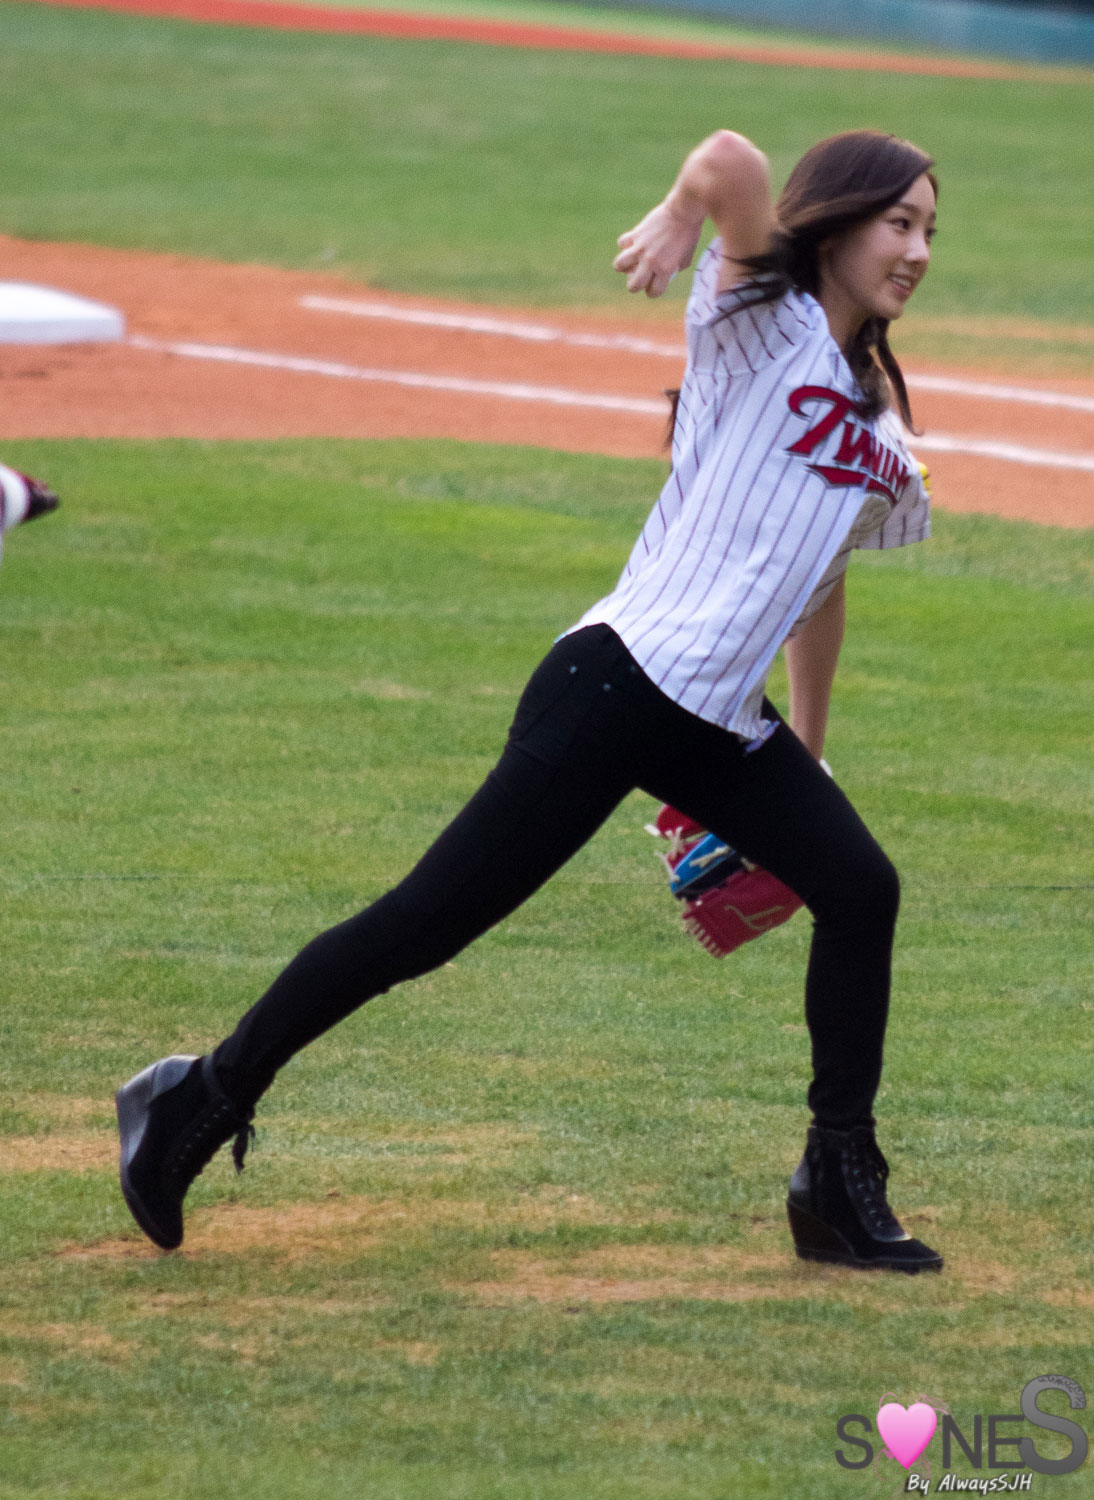 Taeyeon throws first pitch